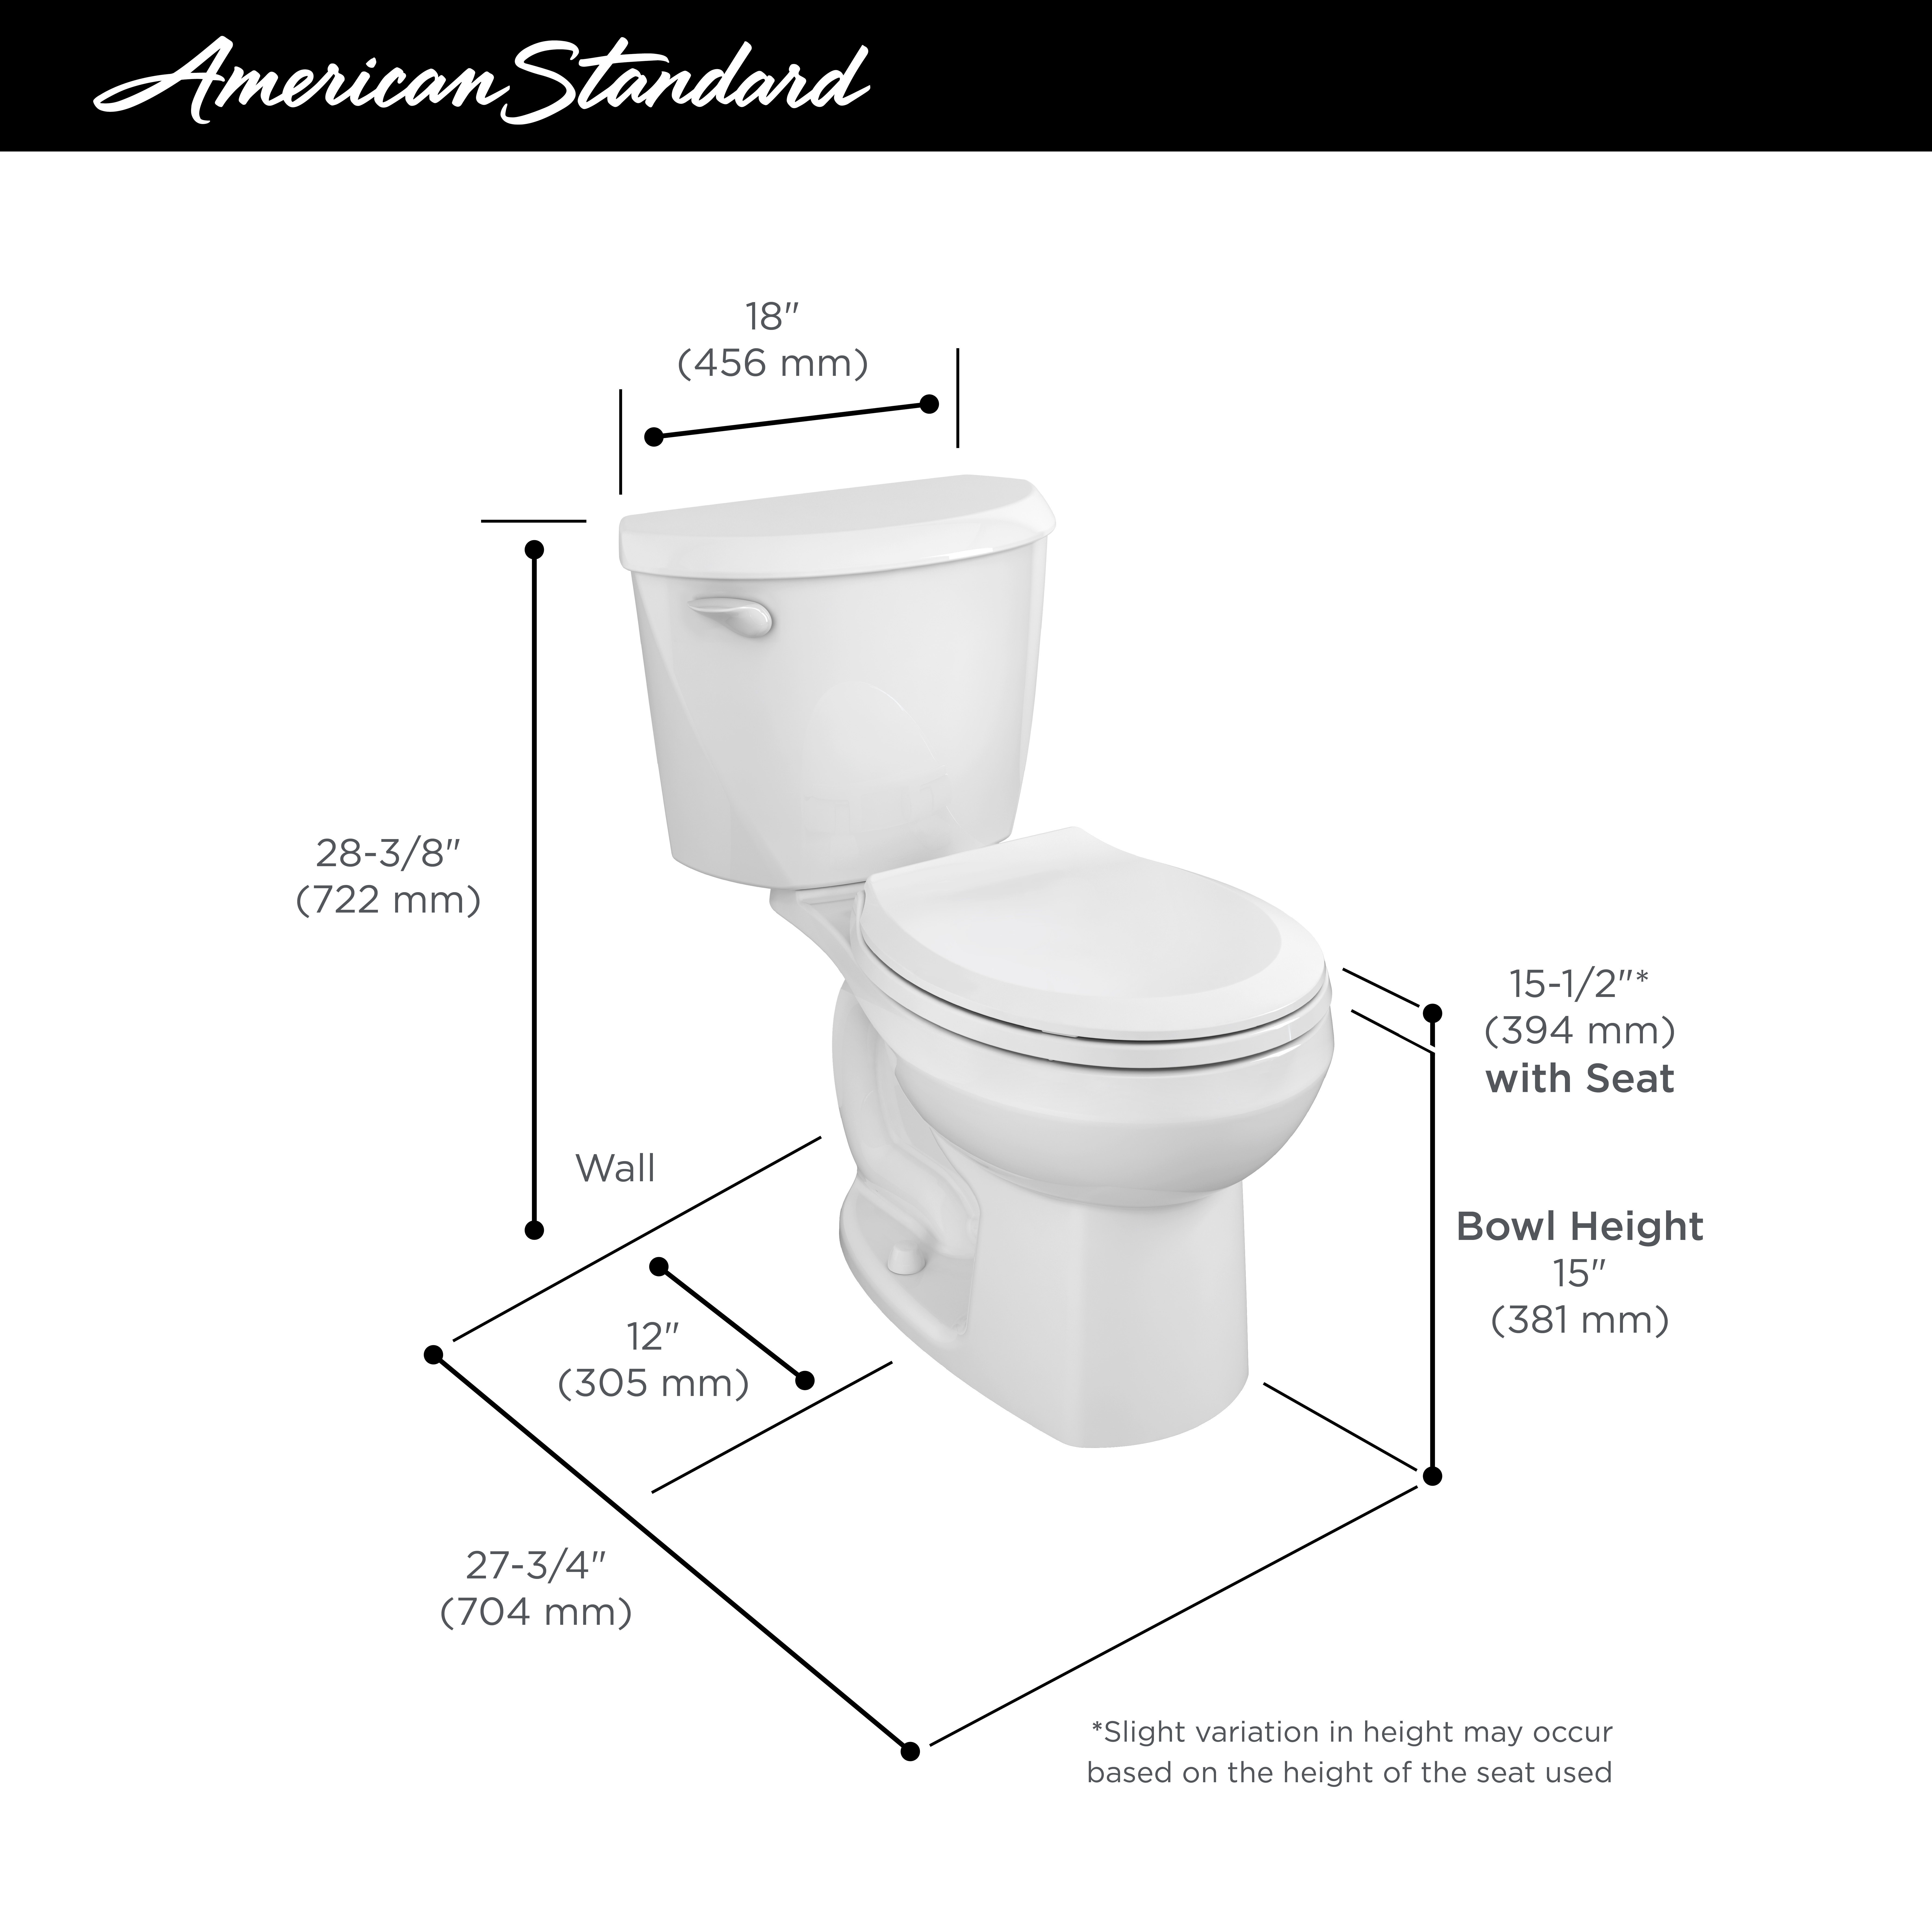 Colony® Two-Piece 1.6 gpf/6.0 Lpf Standard Height Round Front Toilet Less Seat